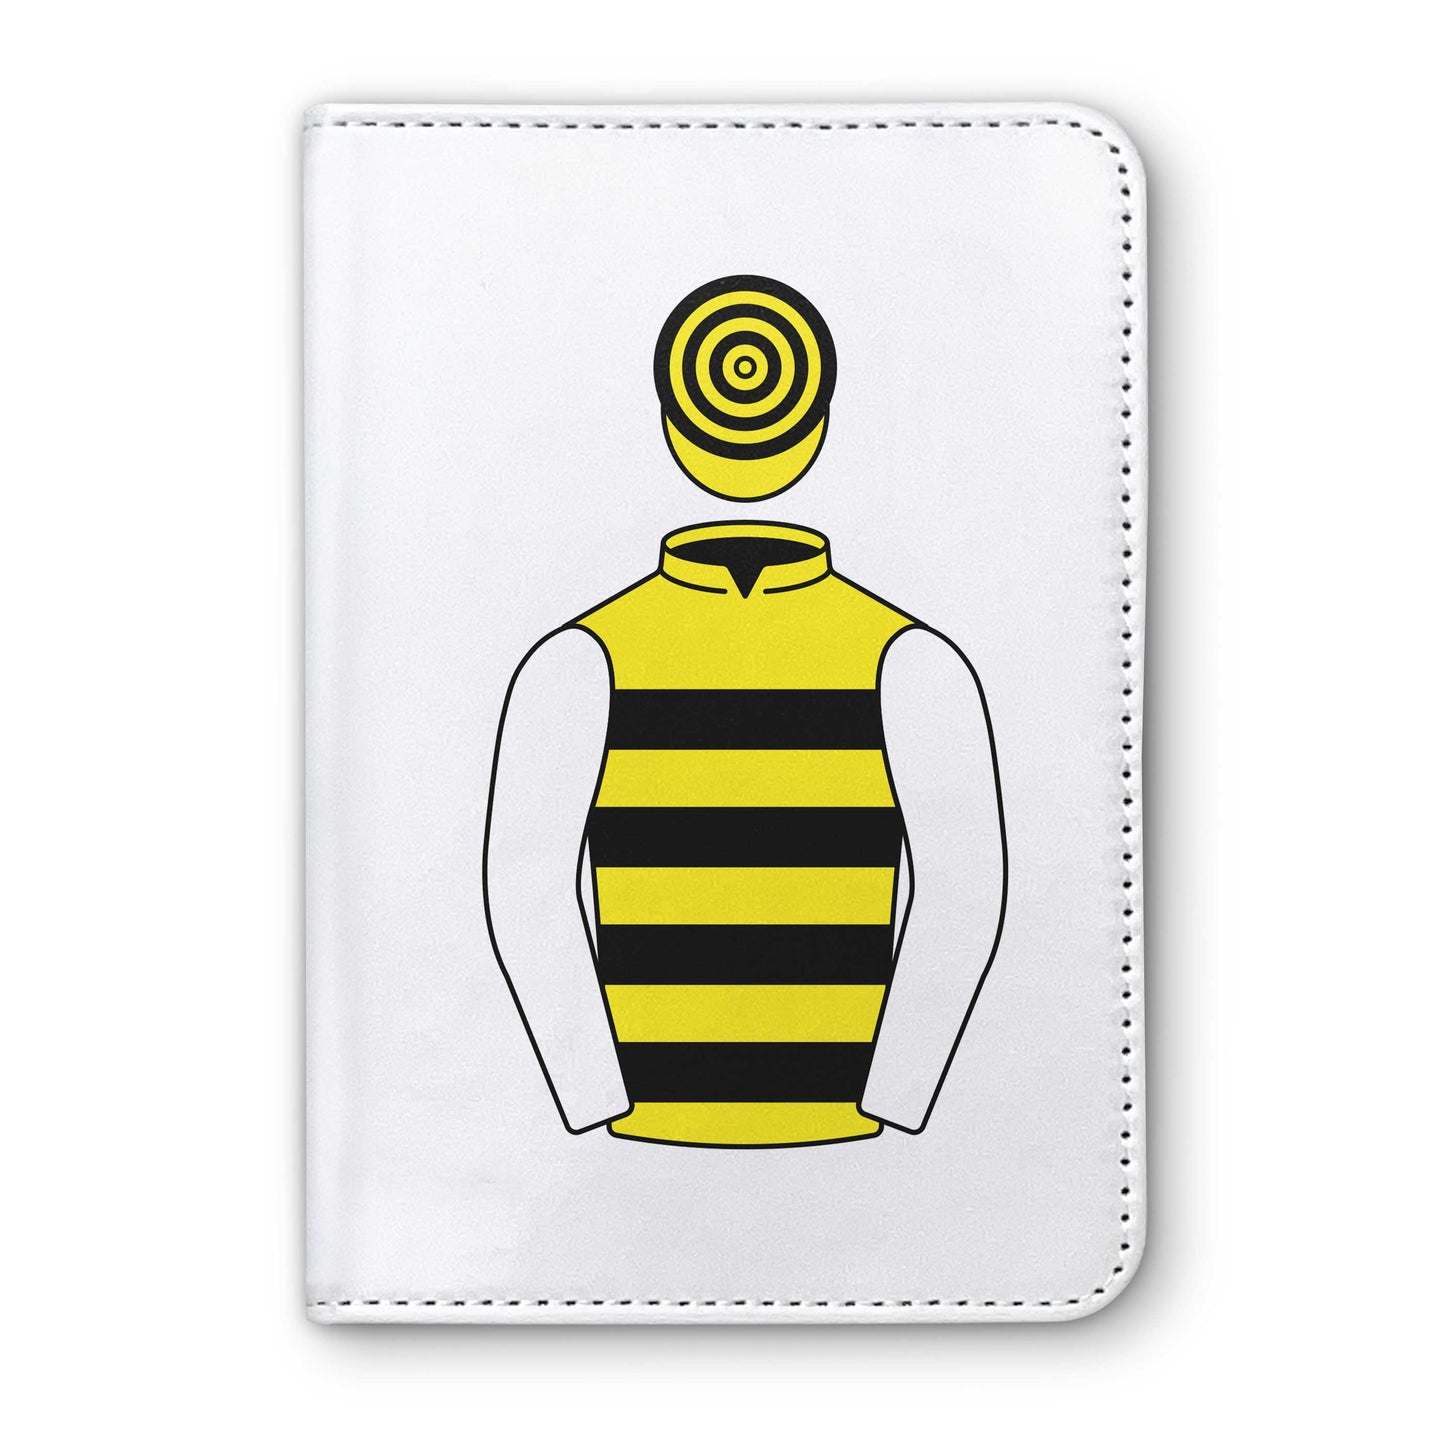 Lewis, Lawson And Hope Horse Racing Passport Holder - Hacked Up Horse Racing Gifts